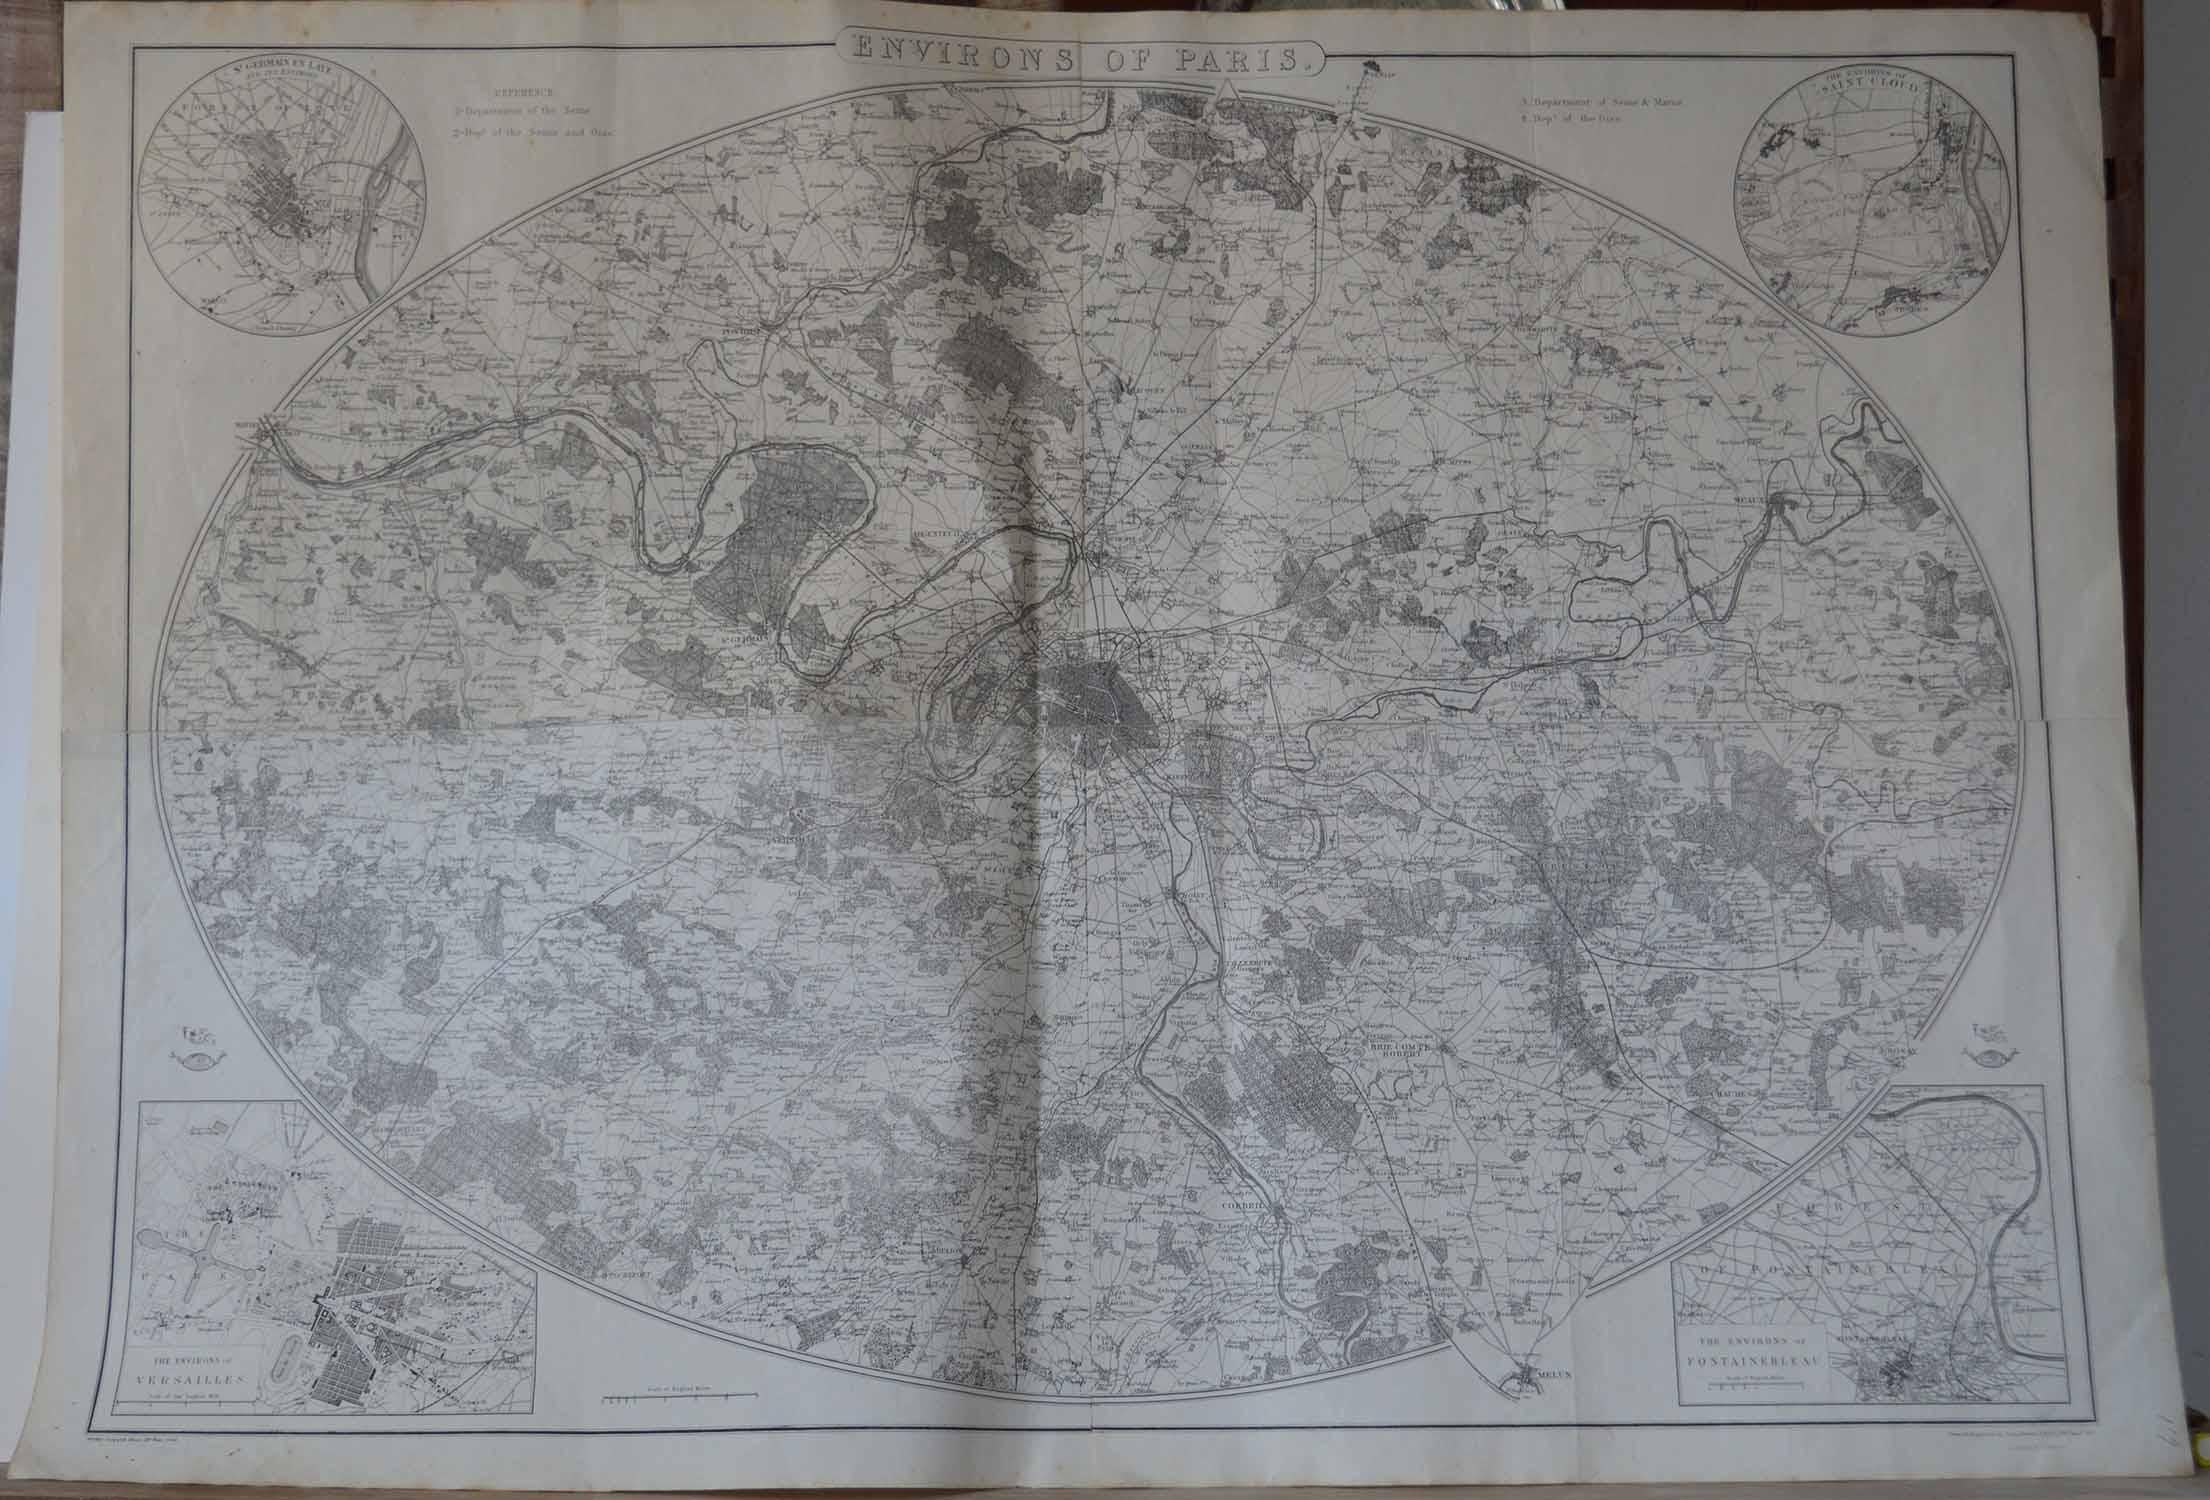 Fabulous monochrome map of Paris.

Vignettes of St Germain En Laye, Saint Cloud, Versailles and Fontainbleau.

Unframed.

Drawn by J.Dower.

Lithography by Weller. 4 sheets joined together.

Published, 1861

Good condition. 



 
 